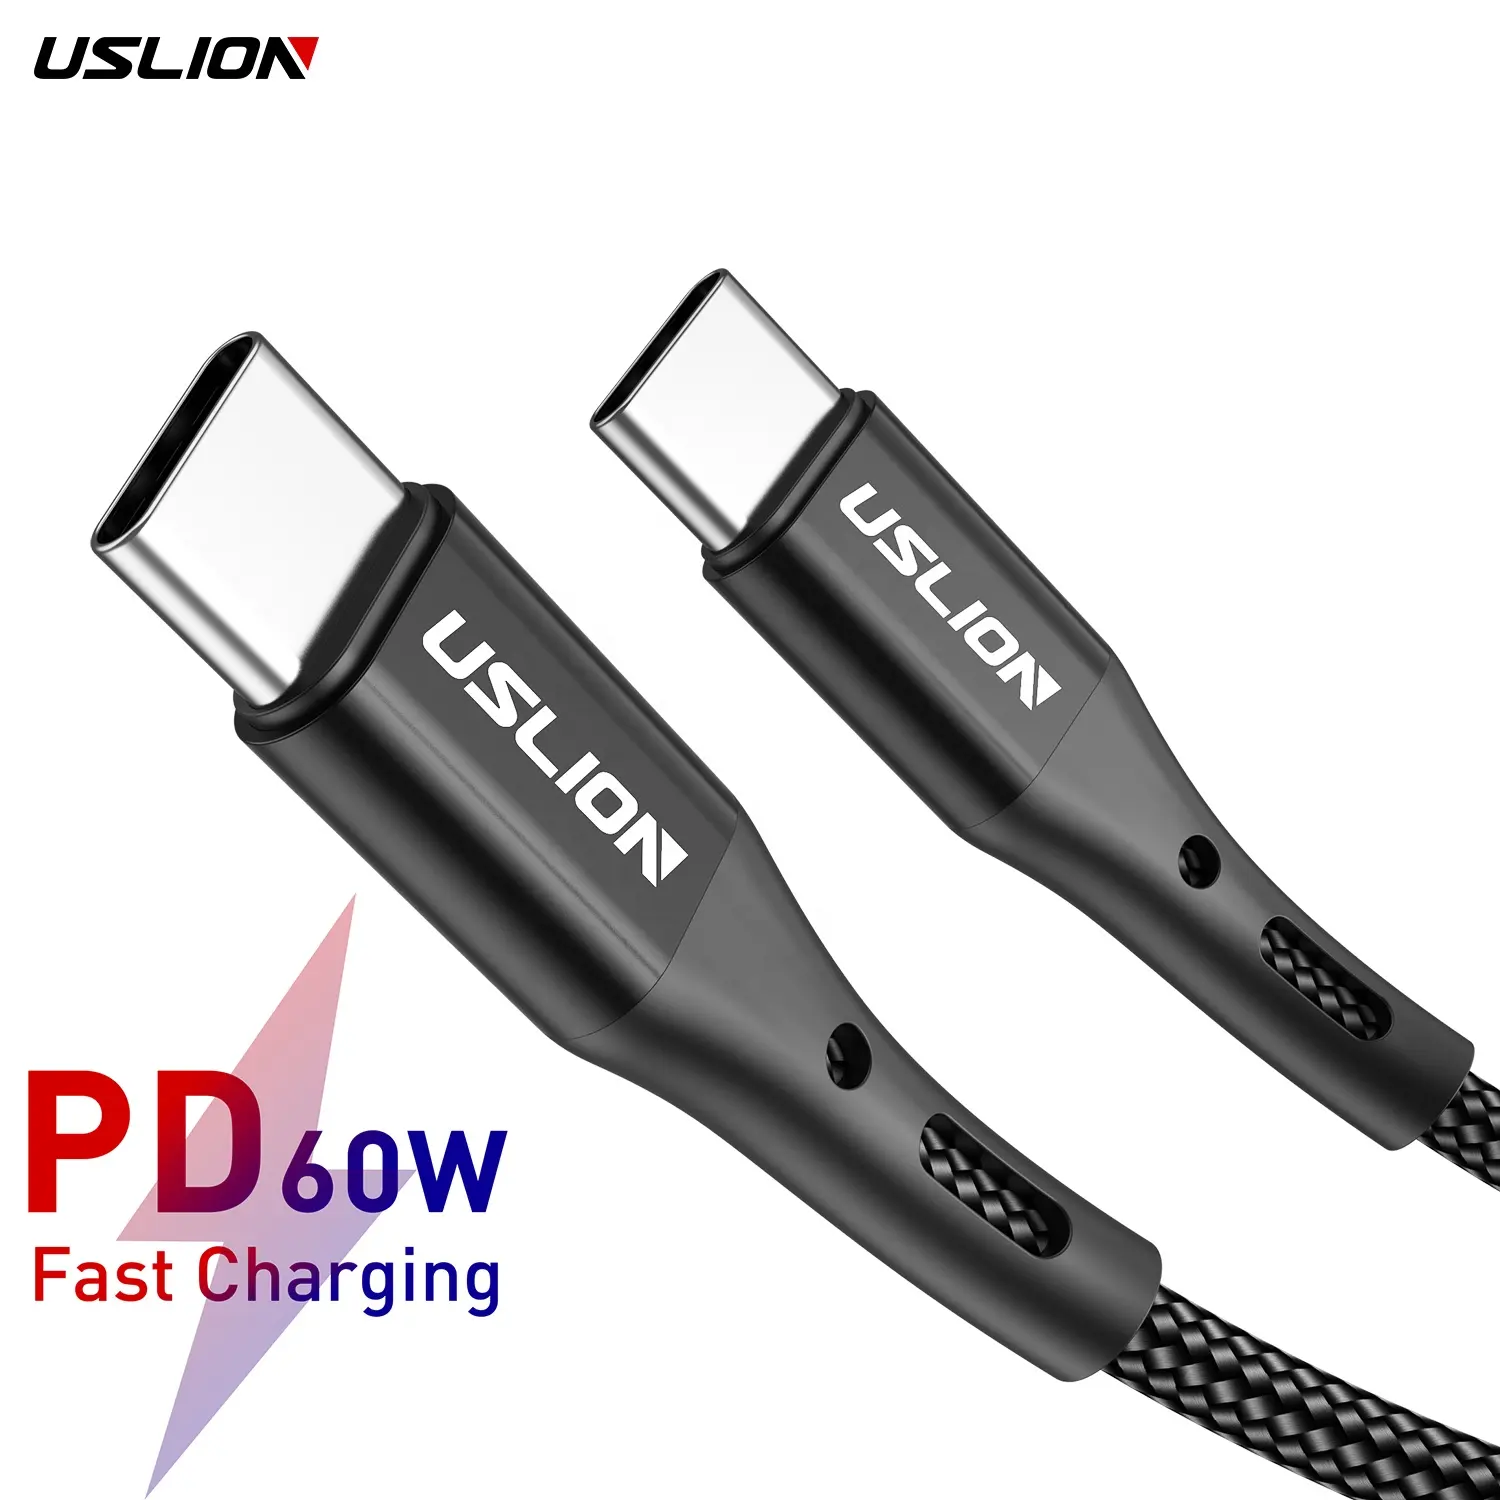 USLION 1M PD60W Quick Charging Cable Charger Mobile Phone Data Cable USB Type C Cable For Samsung S22 S21 S20